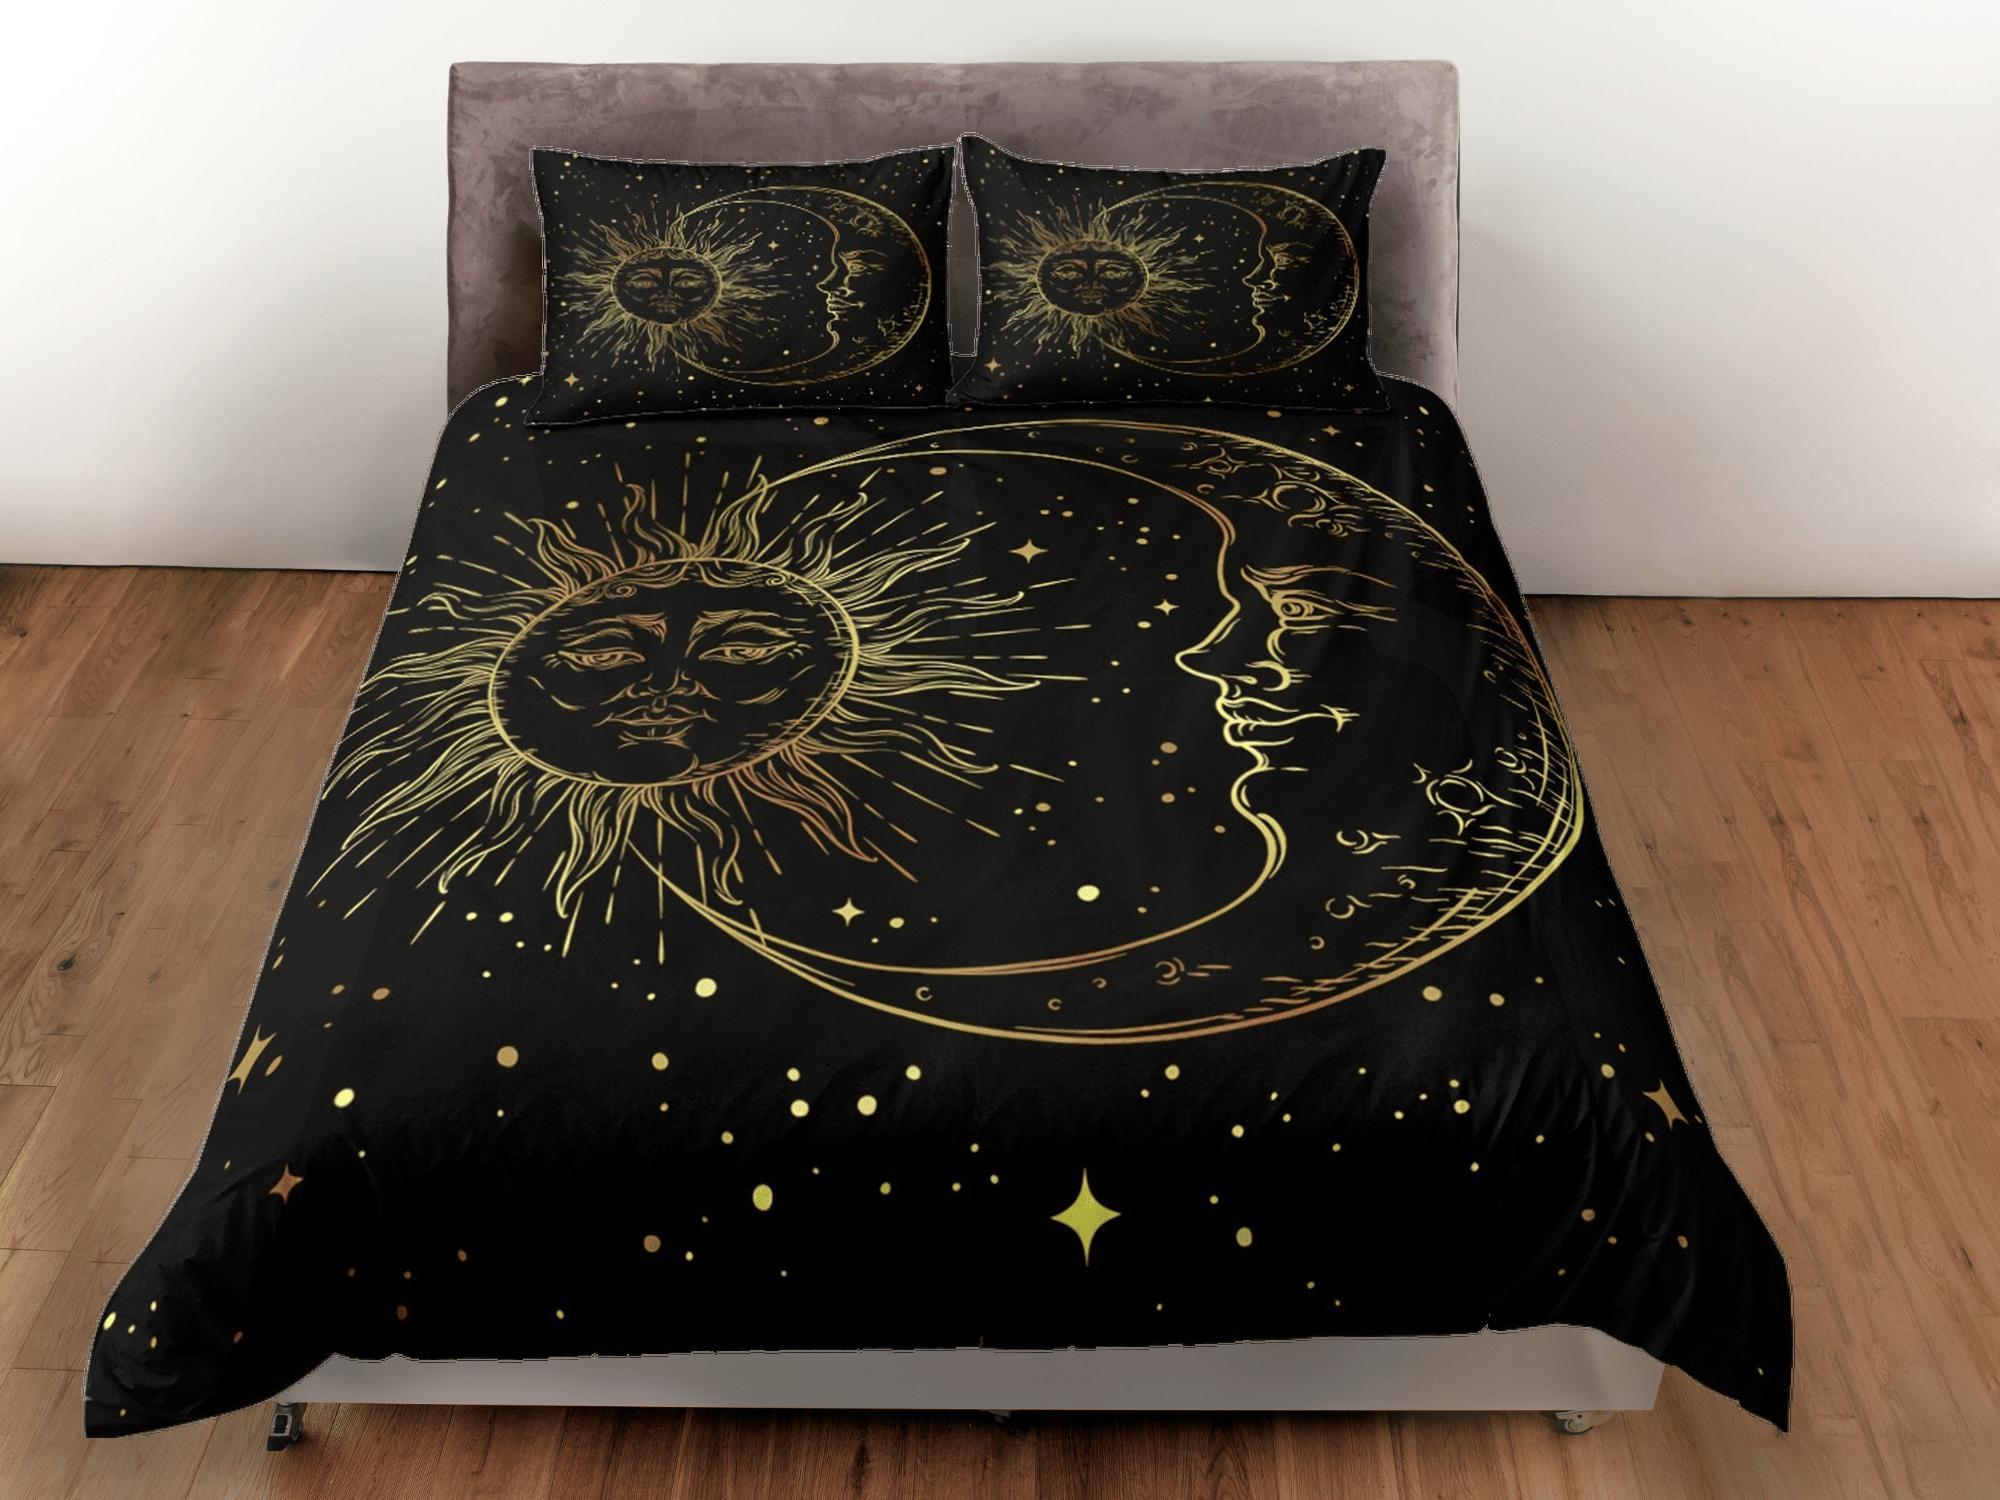 daintyduvet Moon Tarot Black Duvet Cover Colorful Dorm Bedding Set Full, Wiccan Sun and Moon Gothic